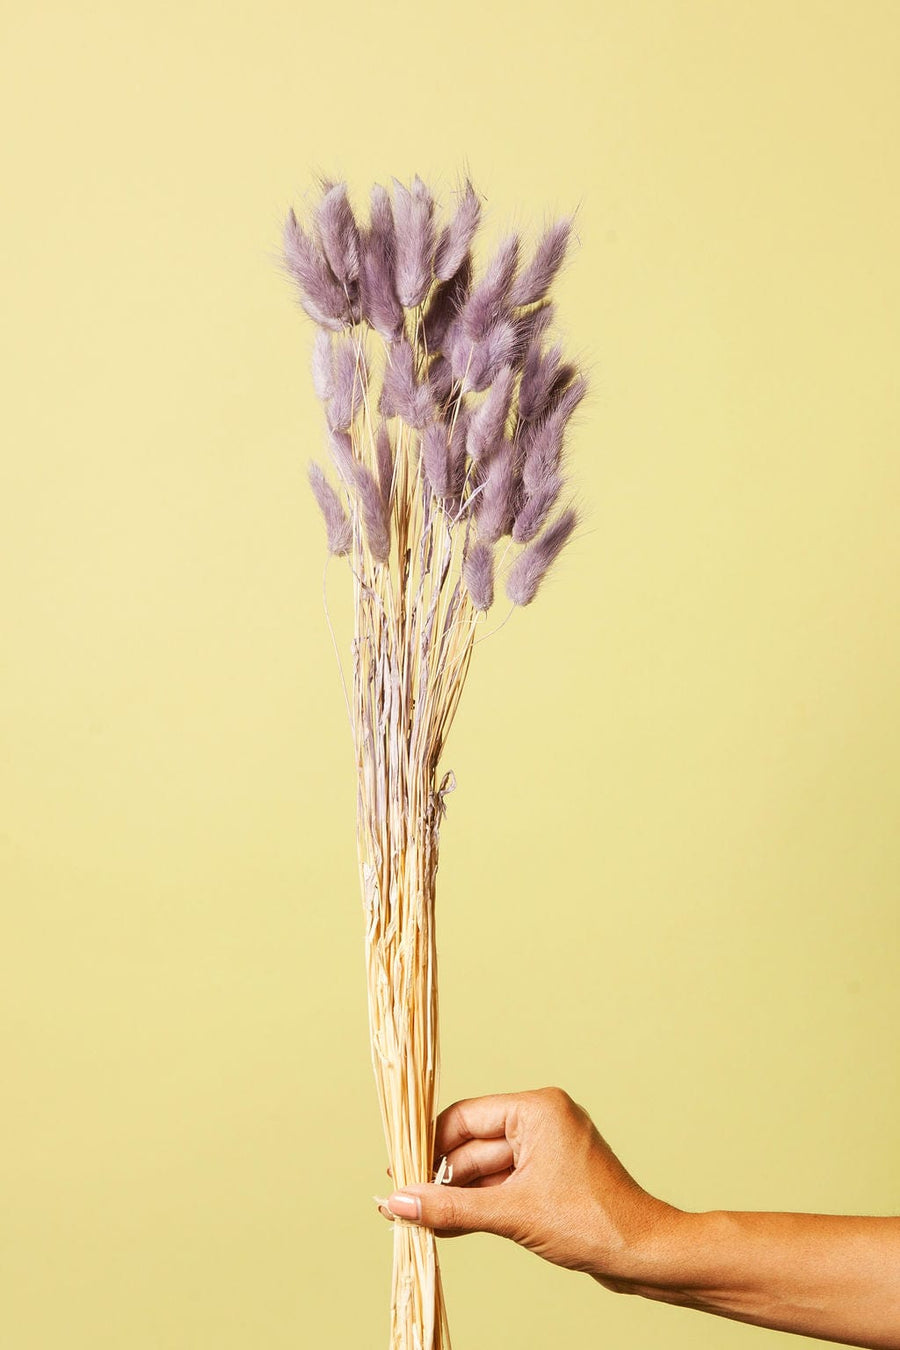 Idlewild Floral Co. Lavender Bunny Tail